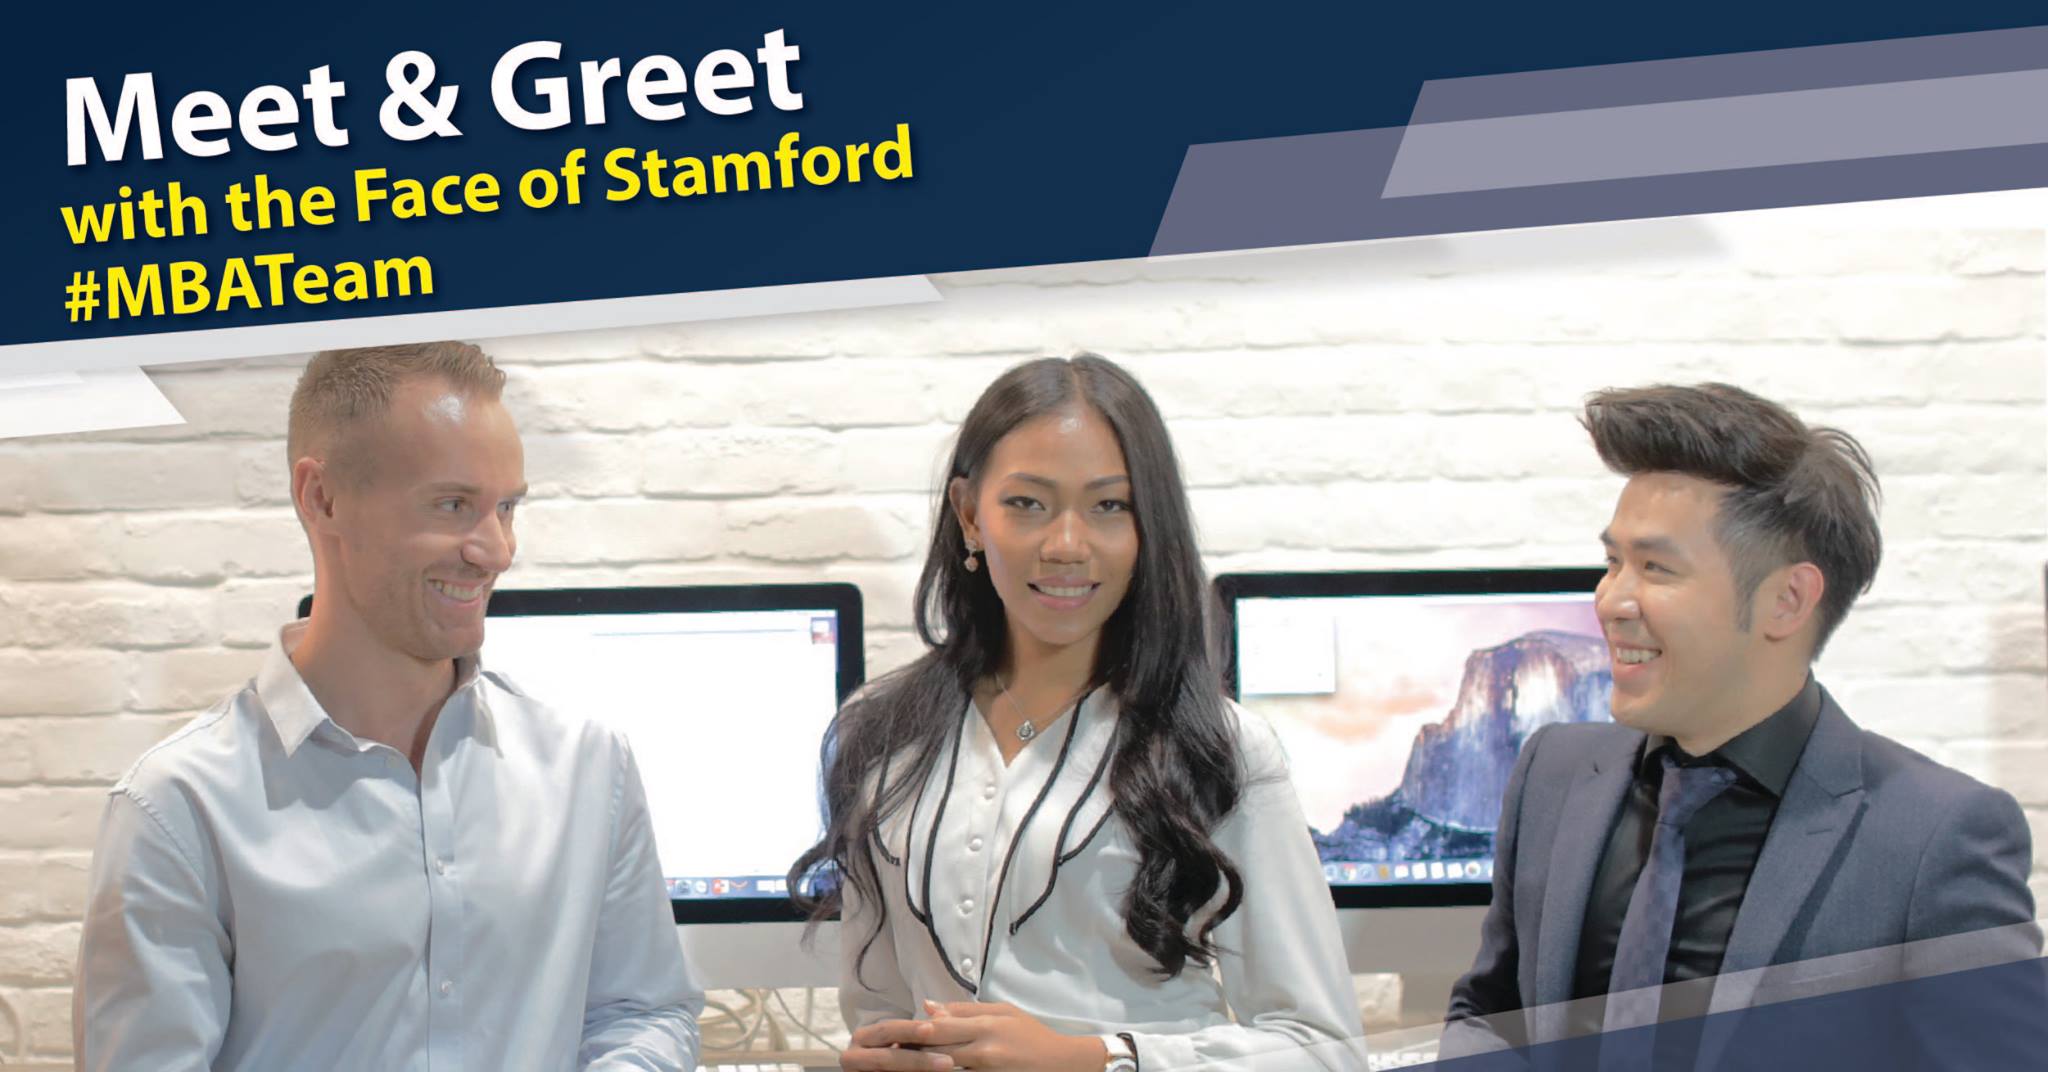 Meet and Greet with the Face of Stamford #MBATeam